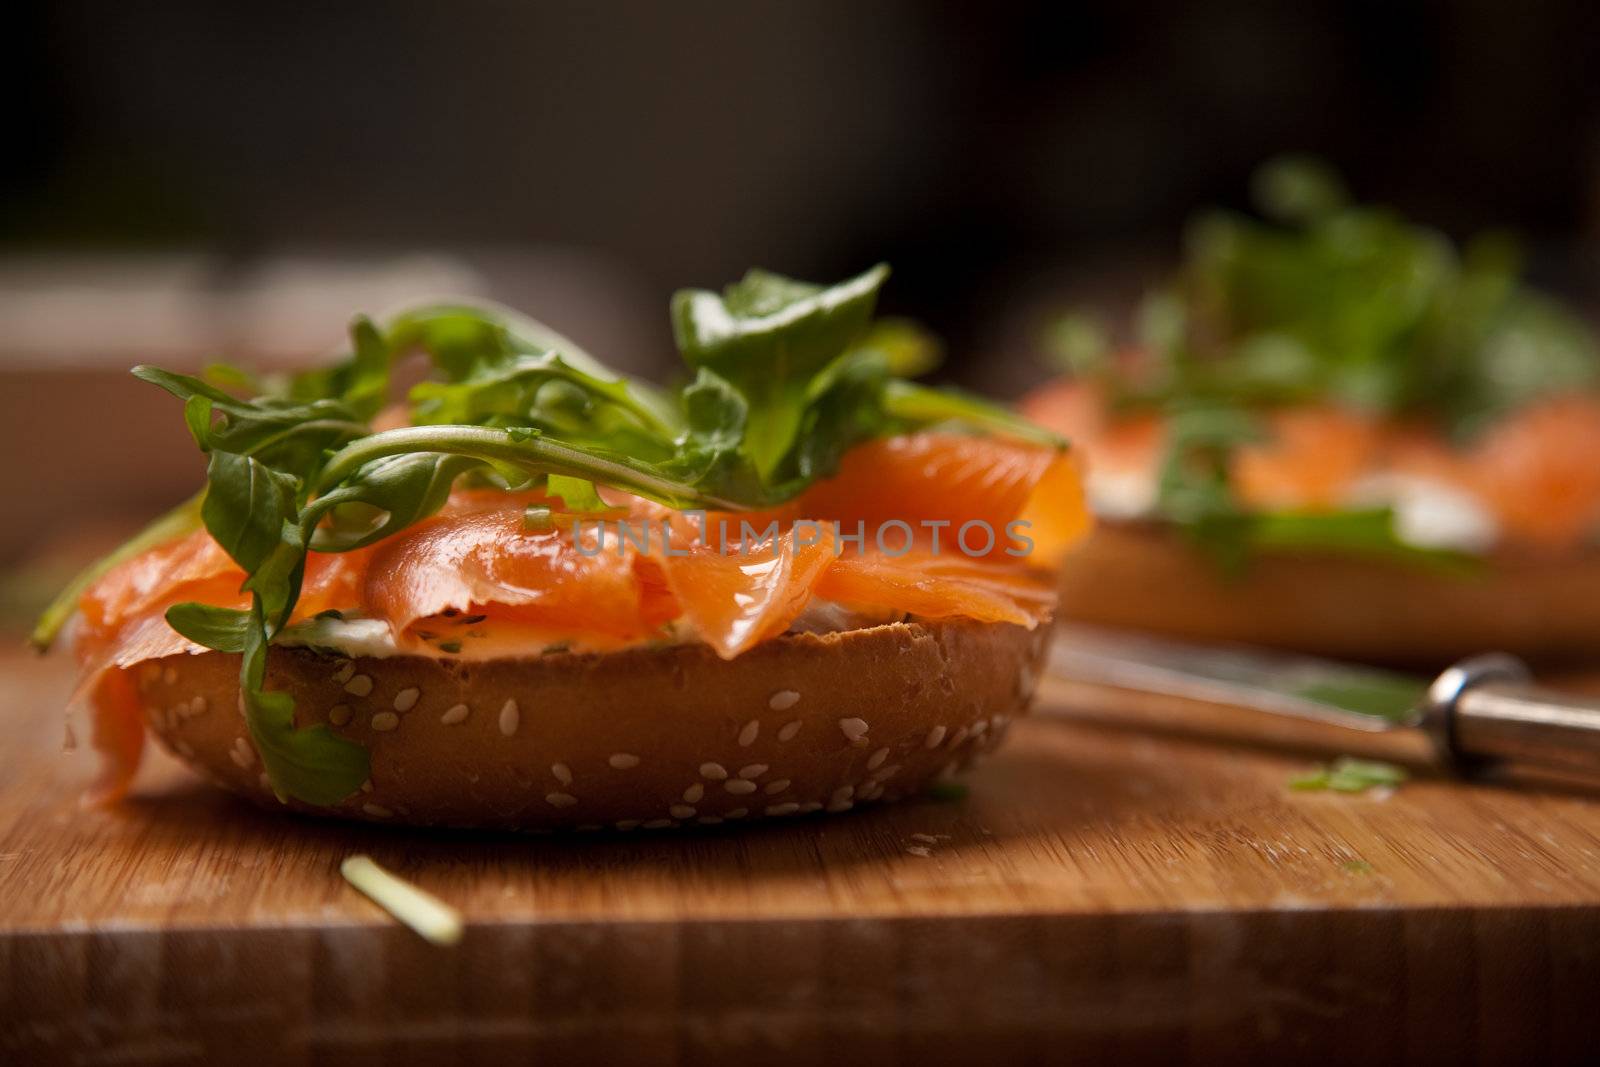 Creamcheese bagel with smoked salmon and rocket